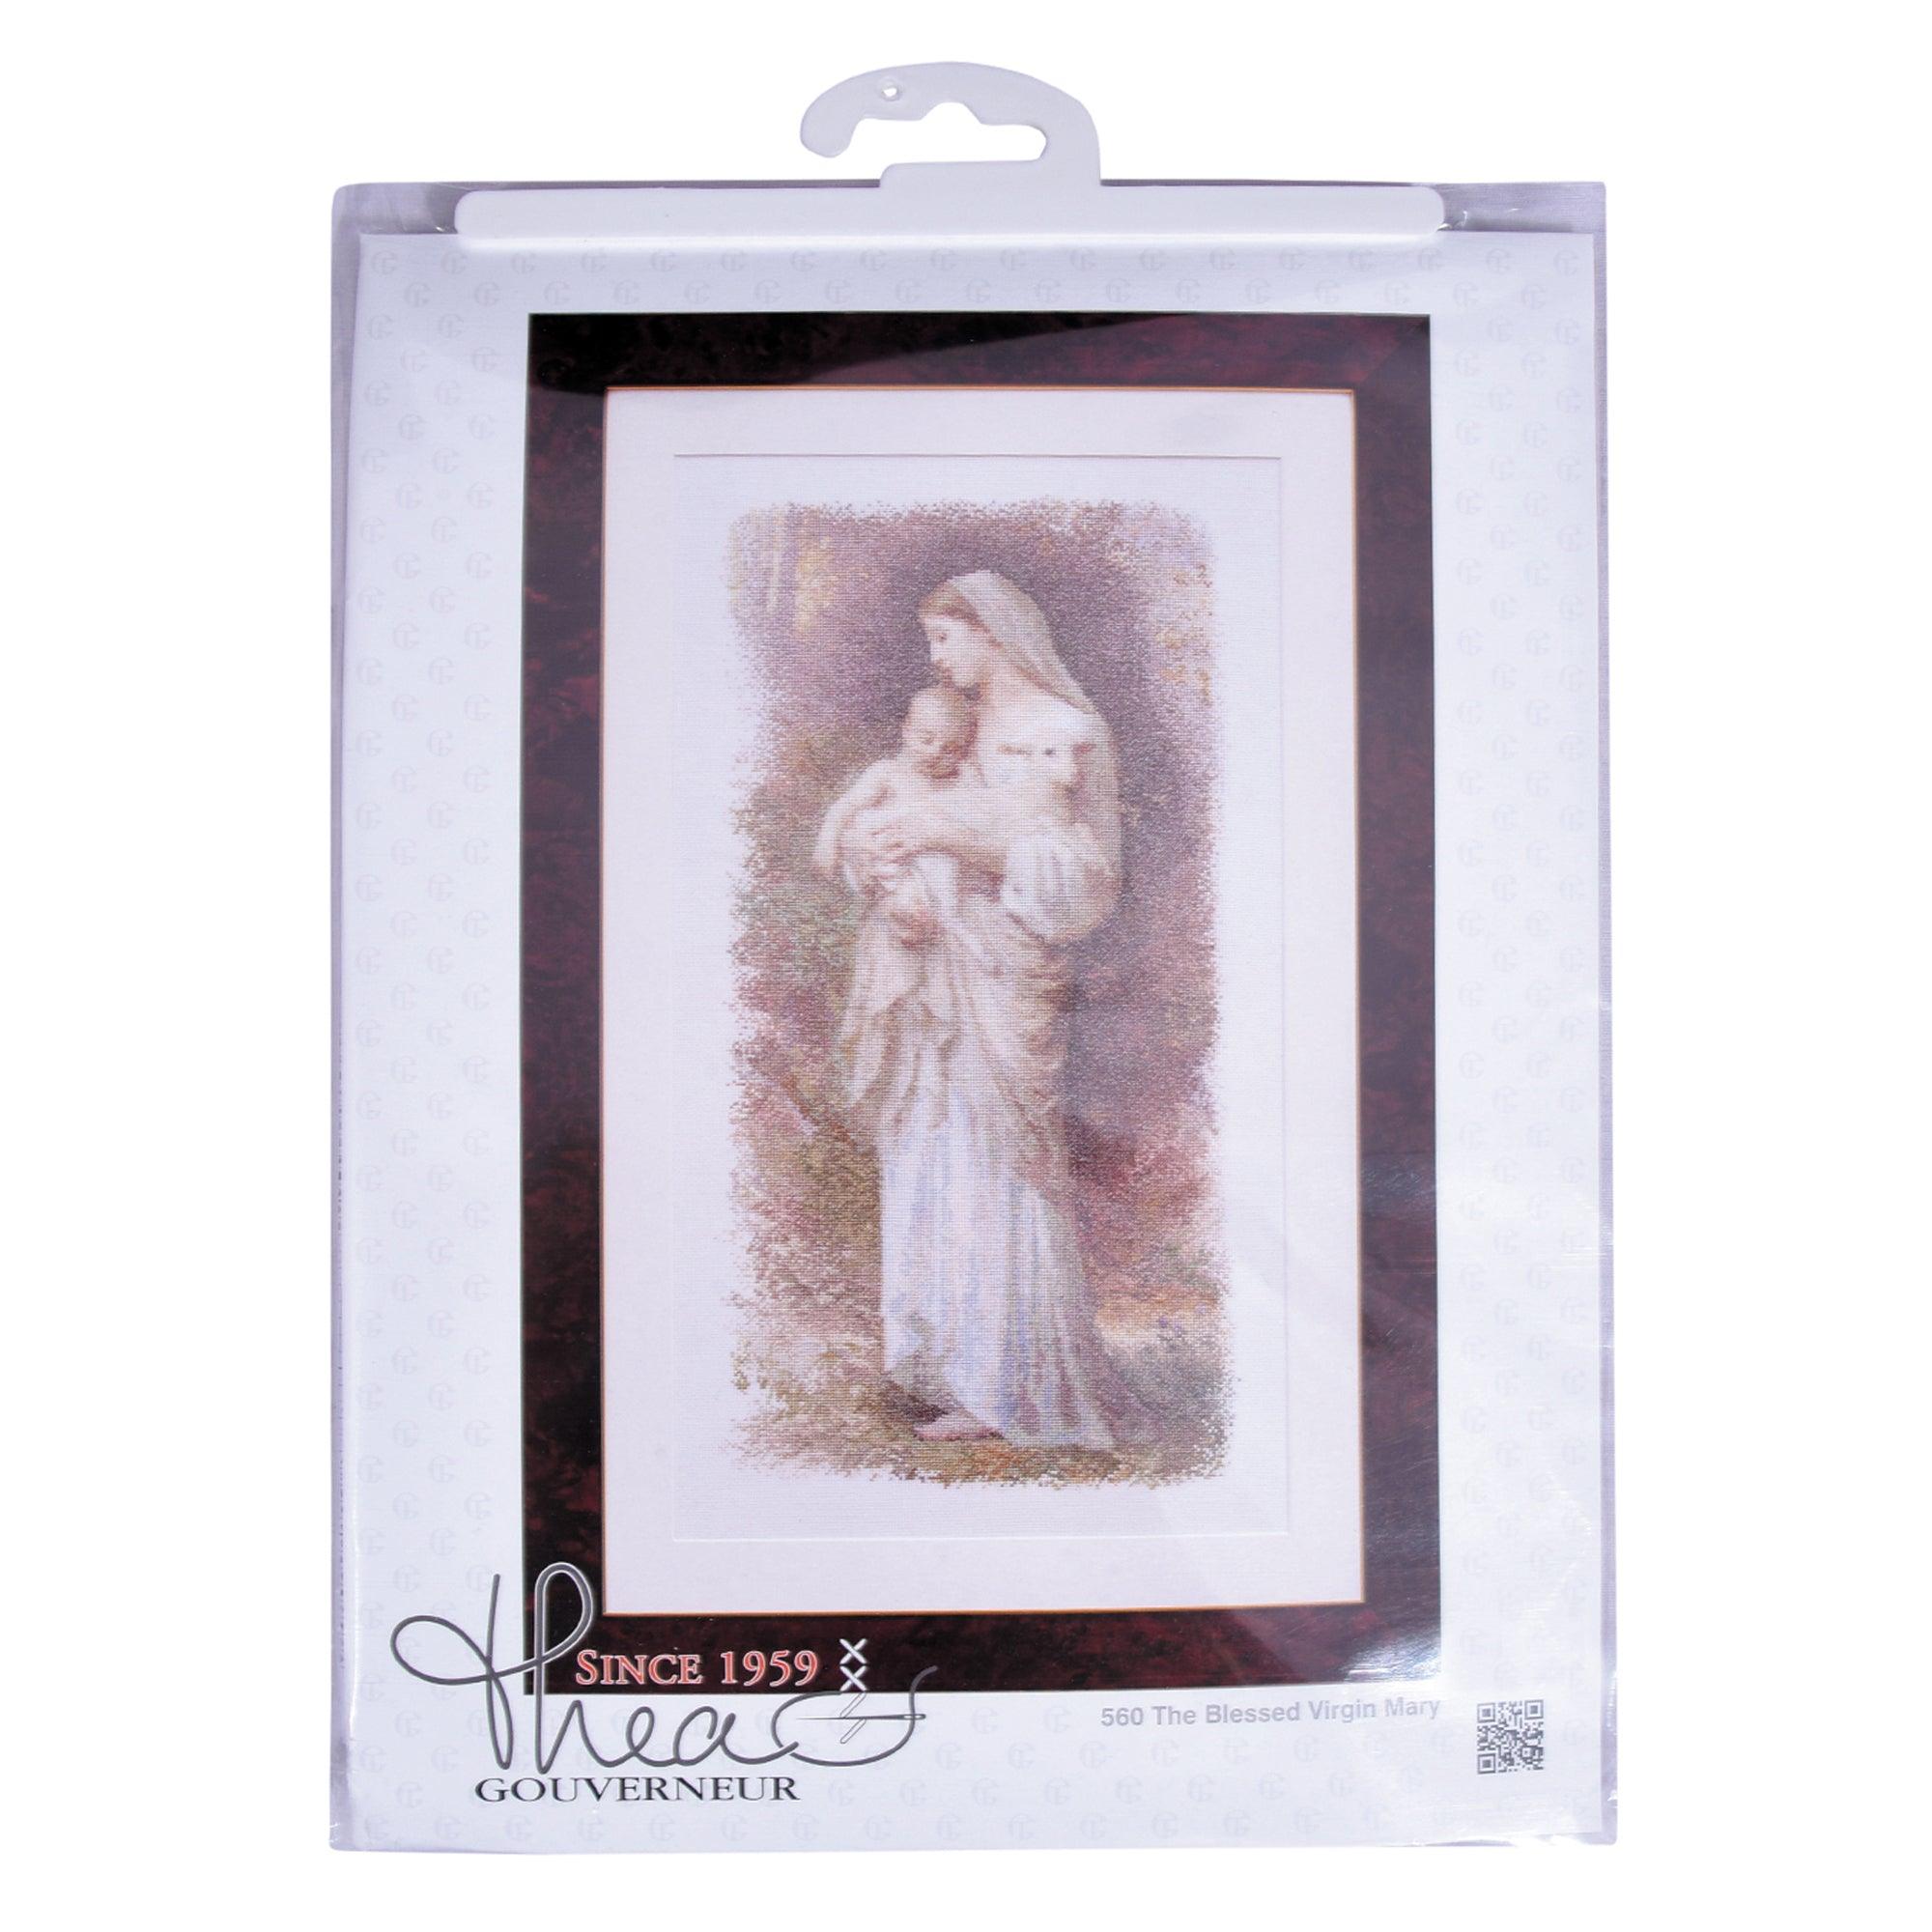 Thea Gouverneur - Counted Cross Stitch Kit - The Blessed Virgin Mary - Linen - 32 count - 560 - Thea Gouverneur Since 1959